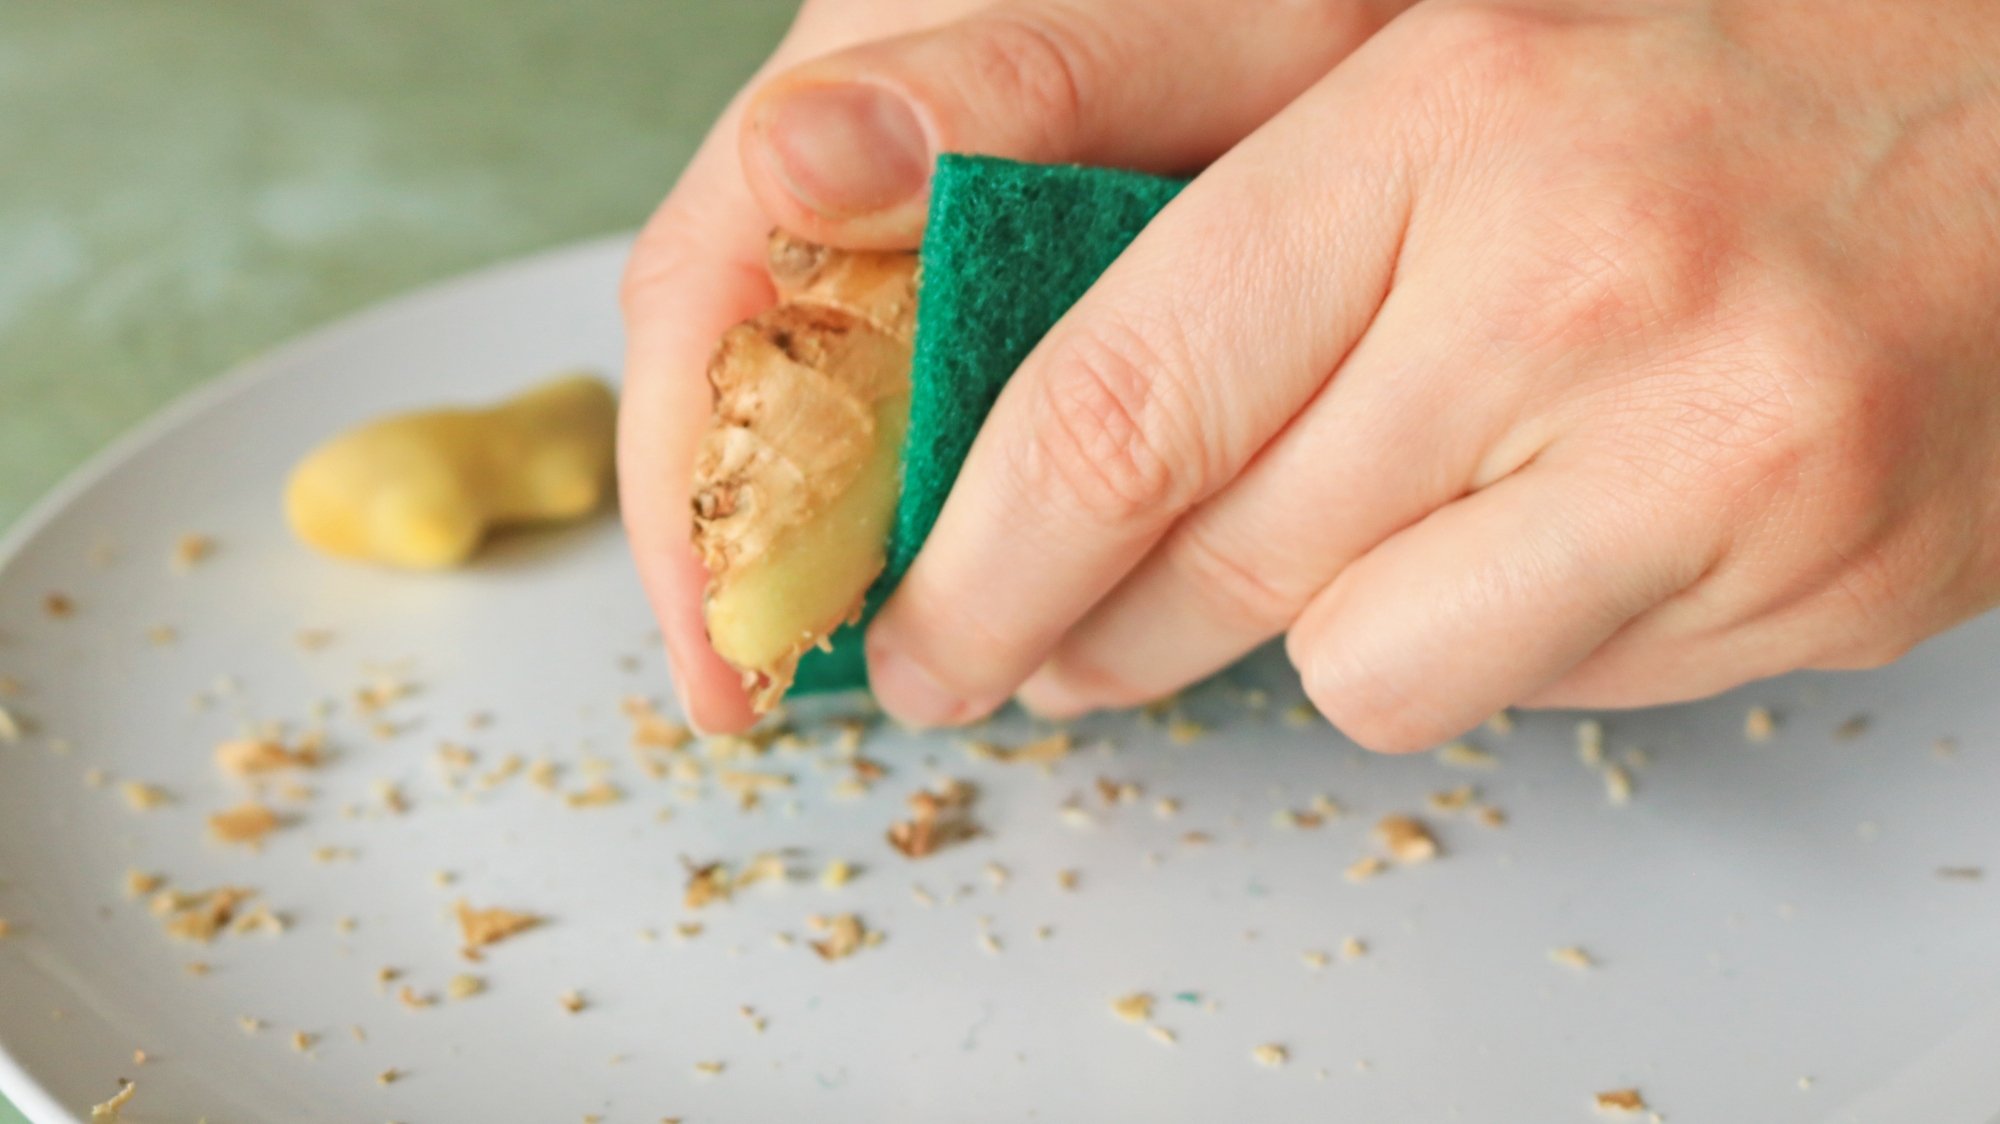 Hand scrubbing ginger root with a green abrasive pad.